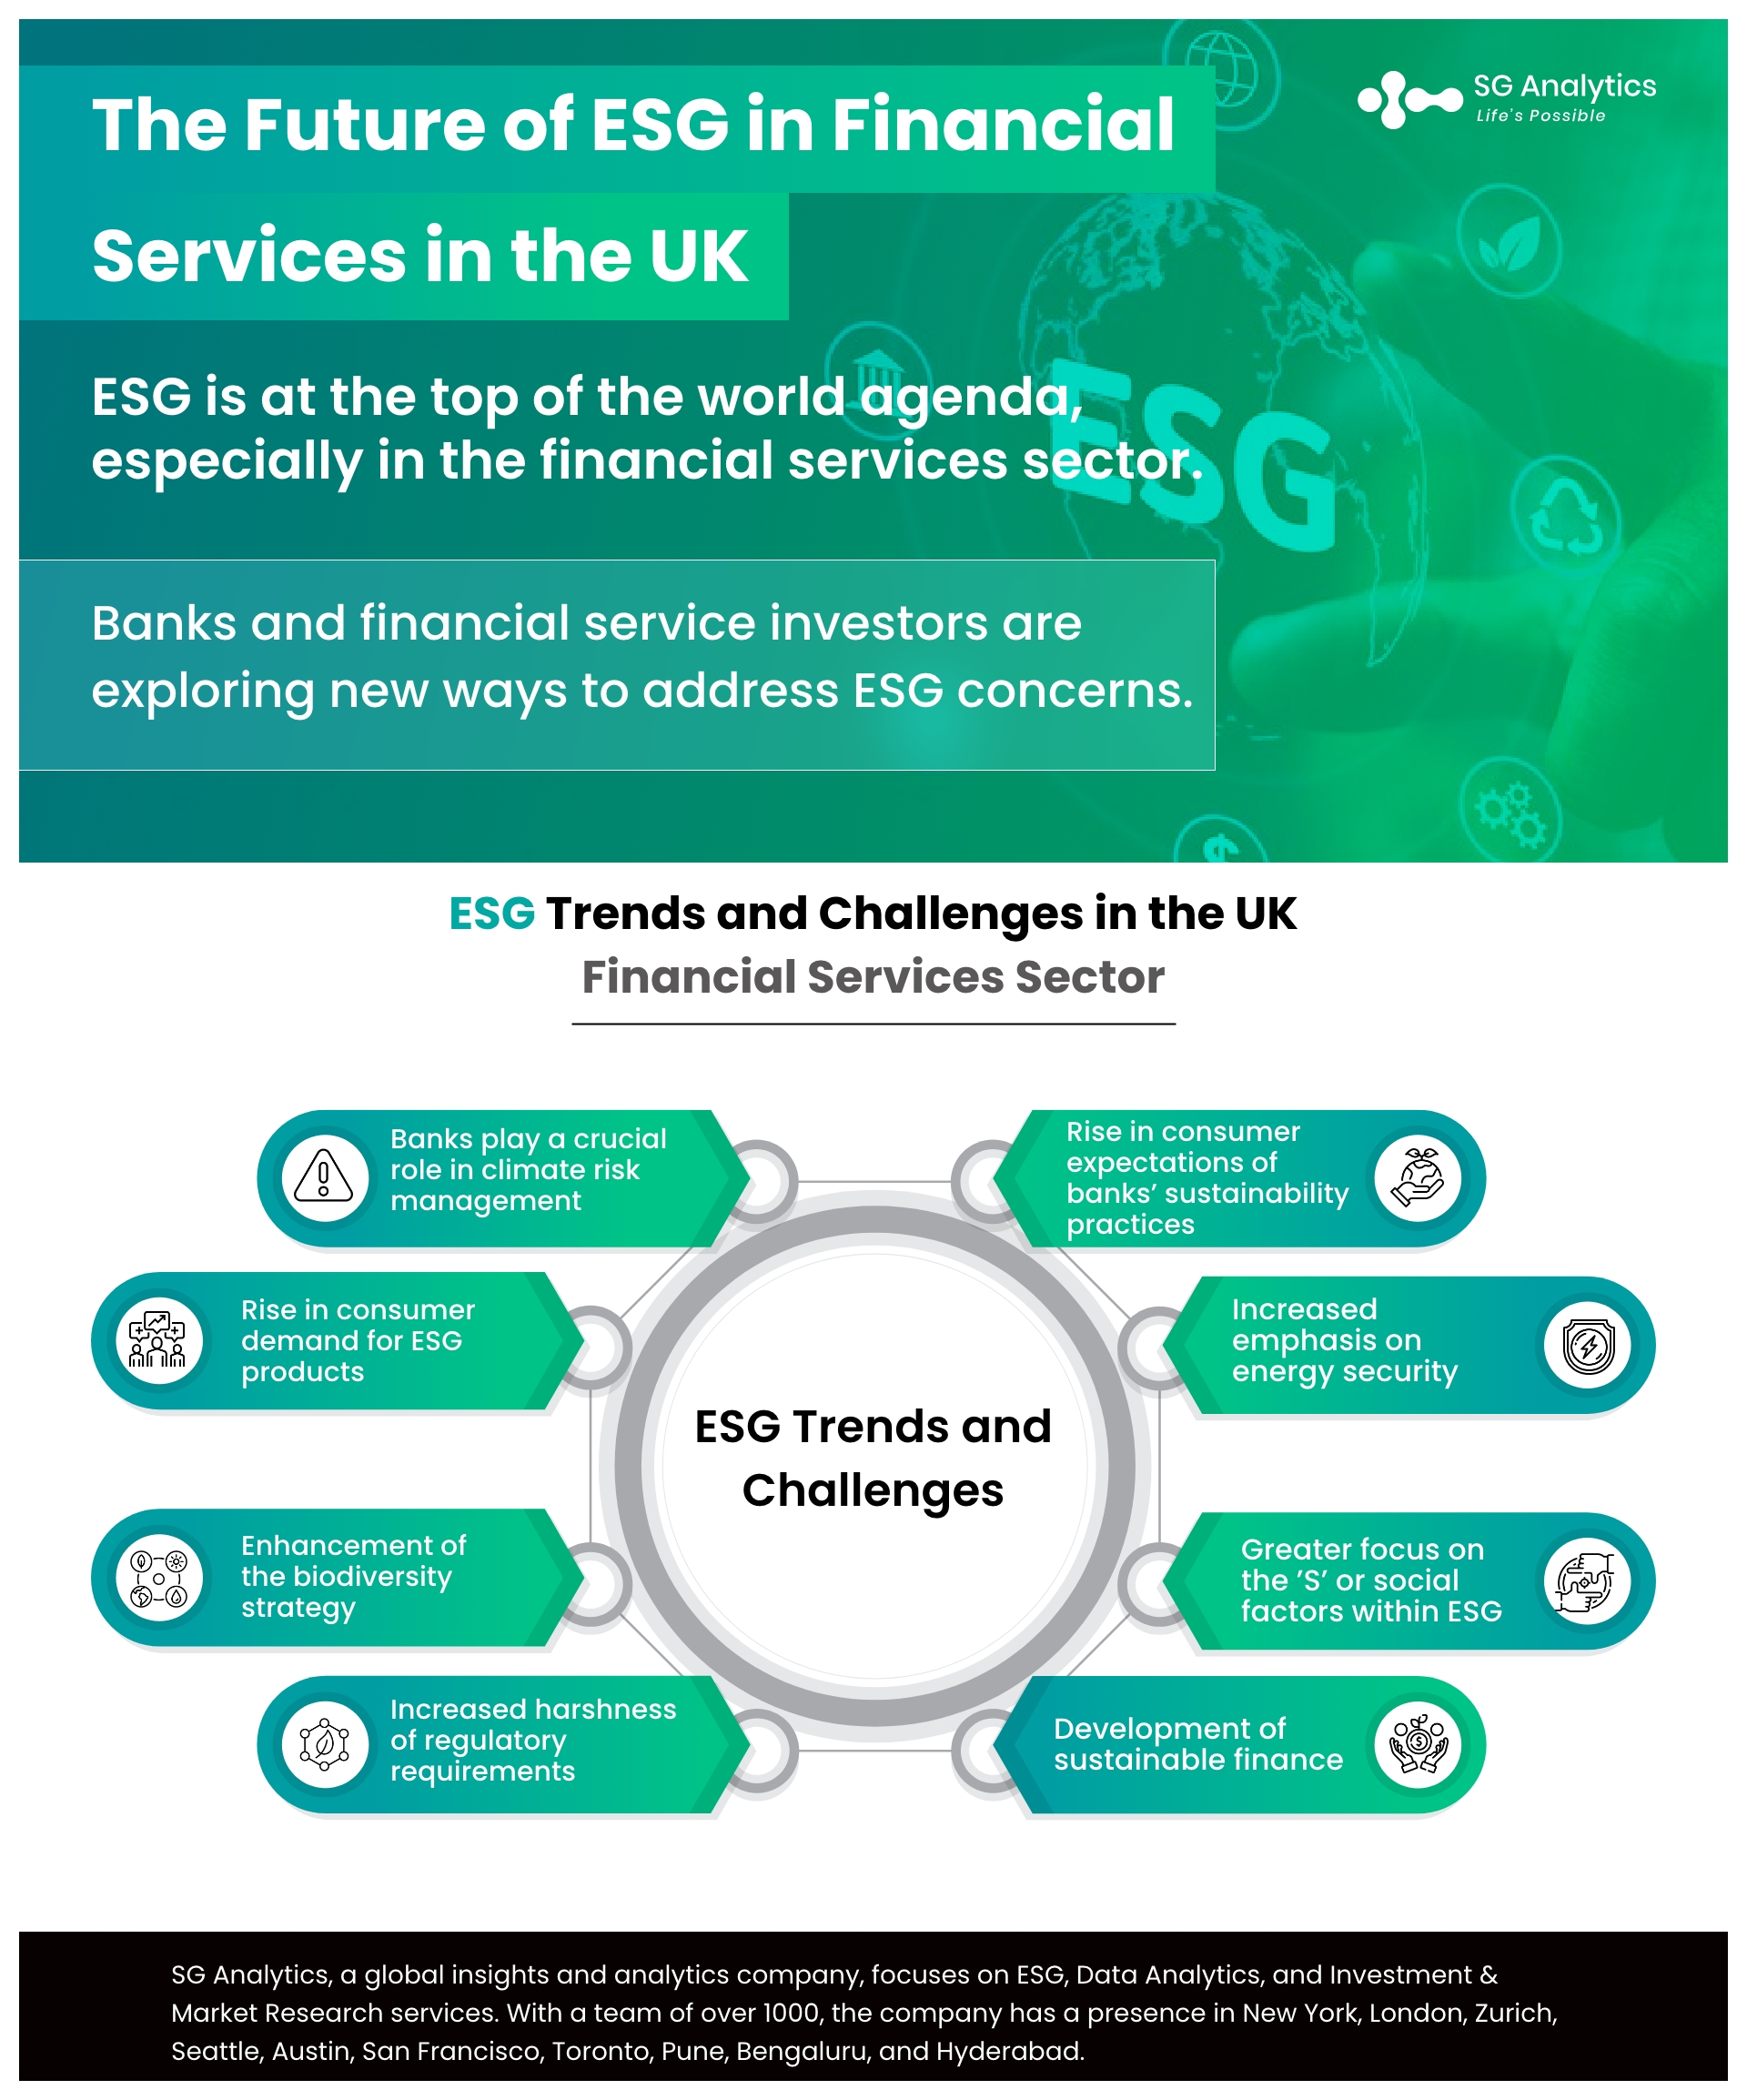 The Future of ESG in Financial Services in the UK